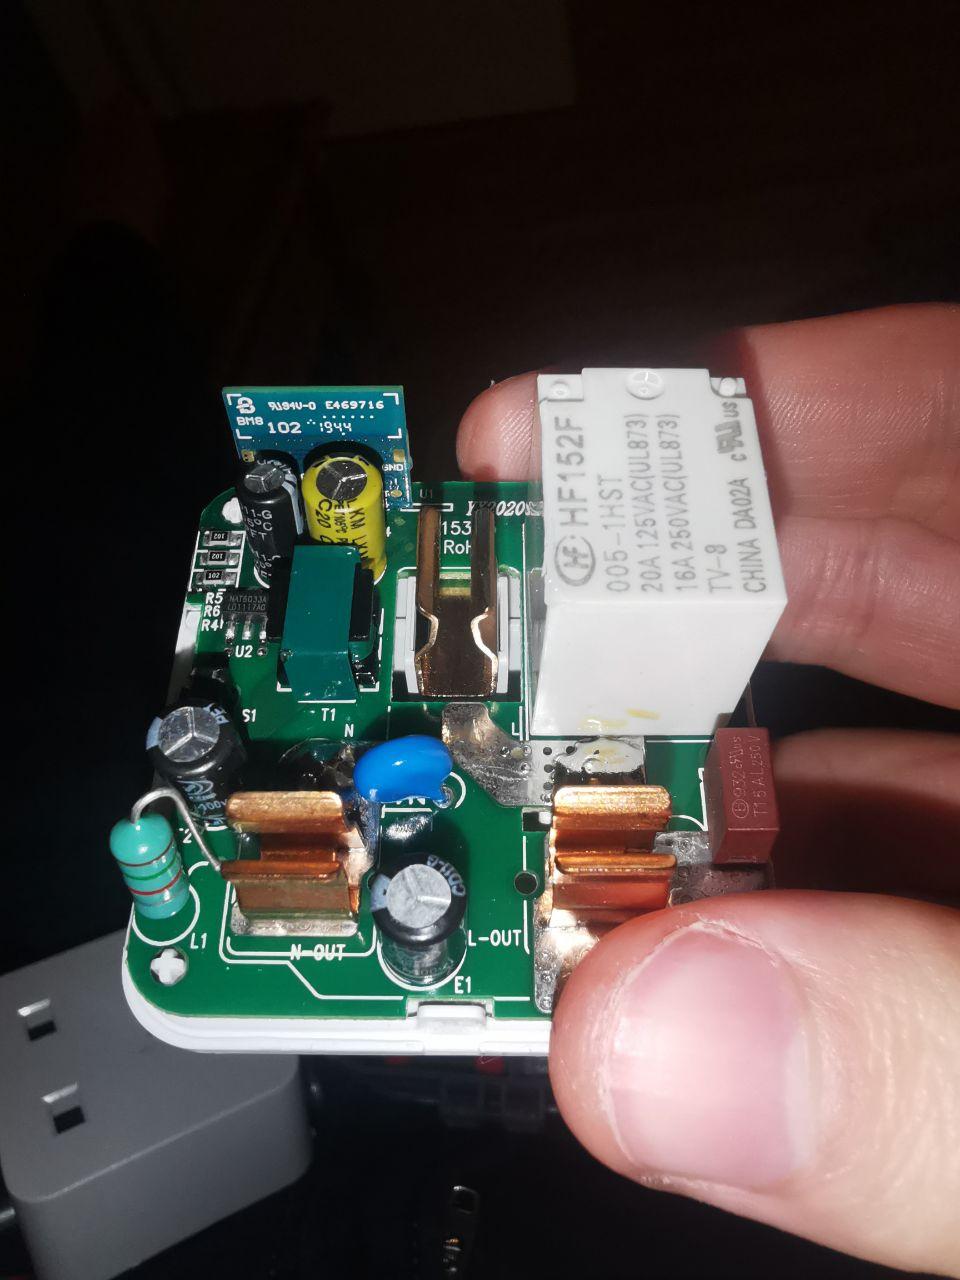 A photo of the circuit board inside the plug, showing the relay, the esp8285, and the bare pass through terminals for mains power